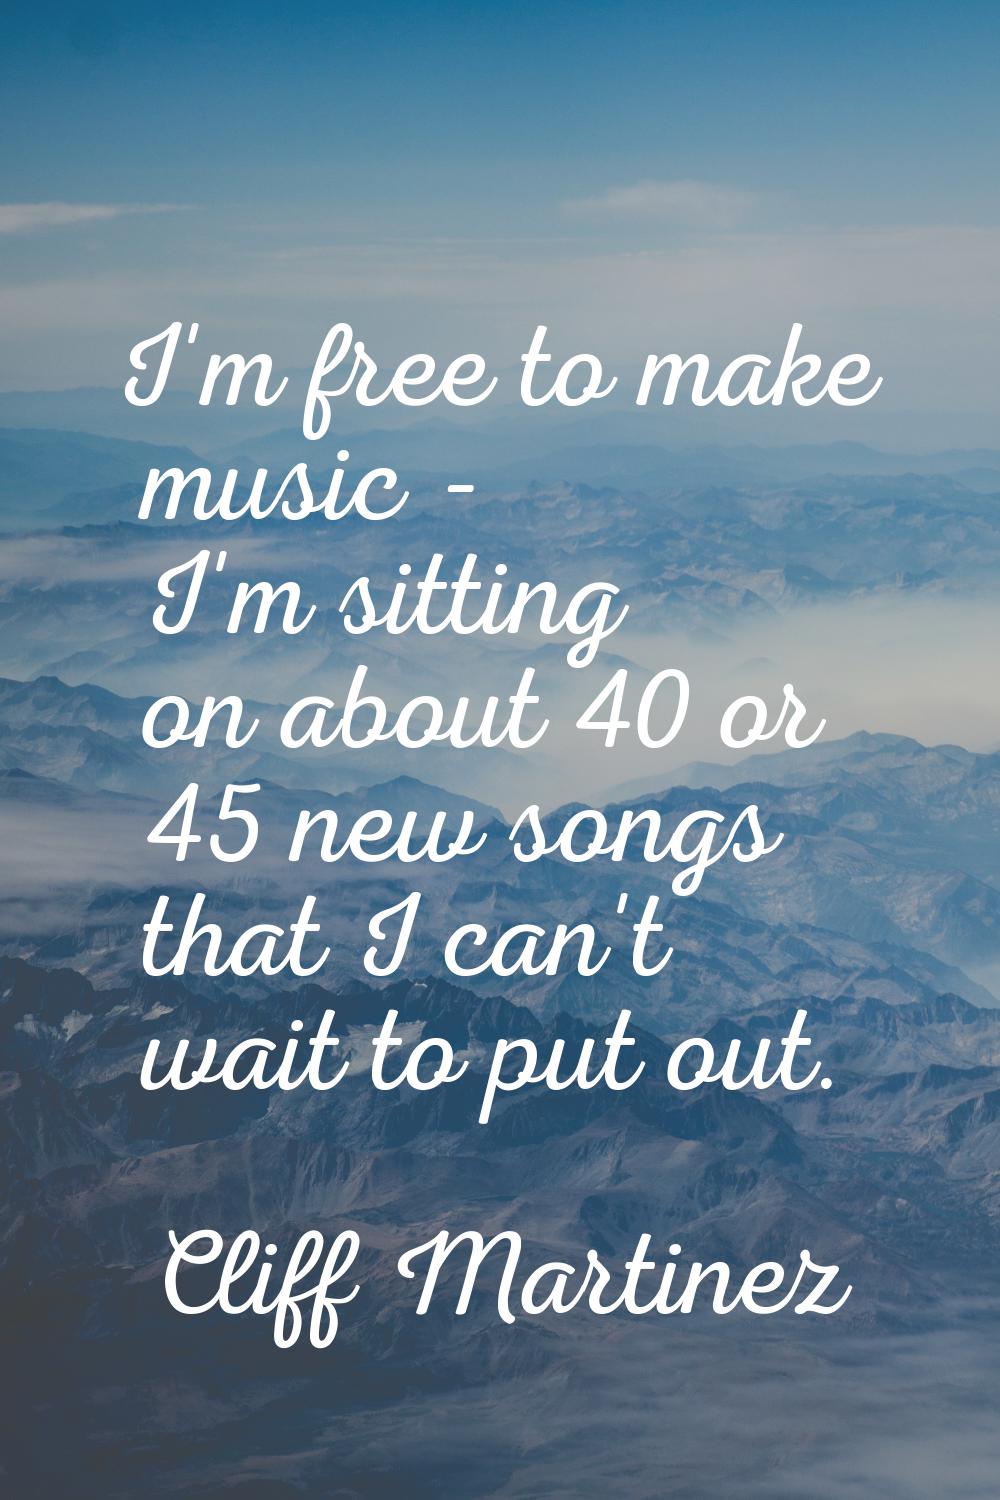 I'm free to make music - I'm sitting on about 40 or 45 new songs that I can't wait to put out.